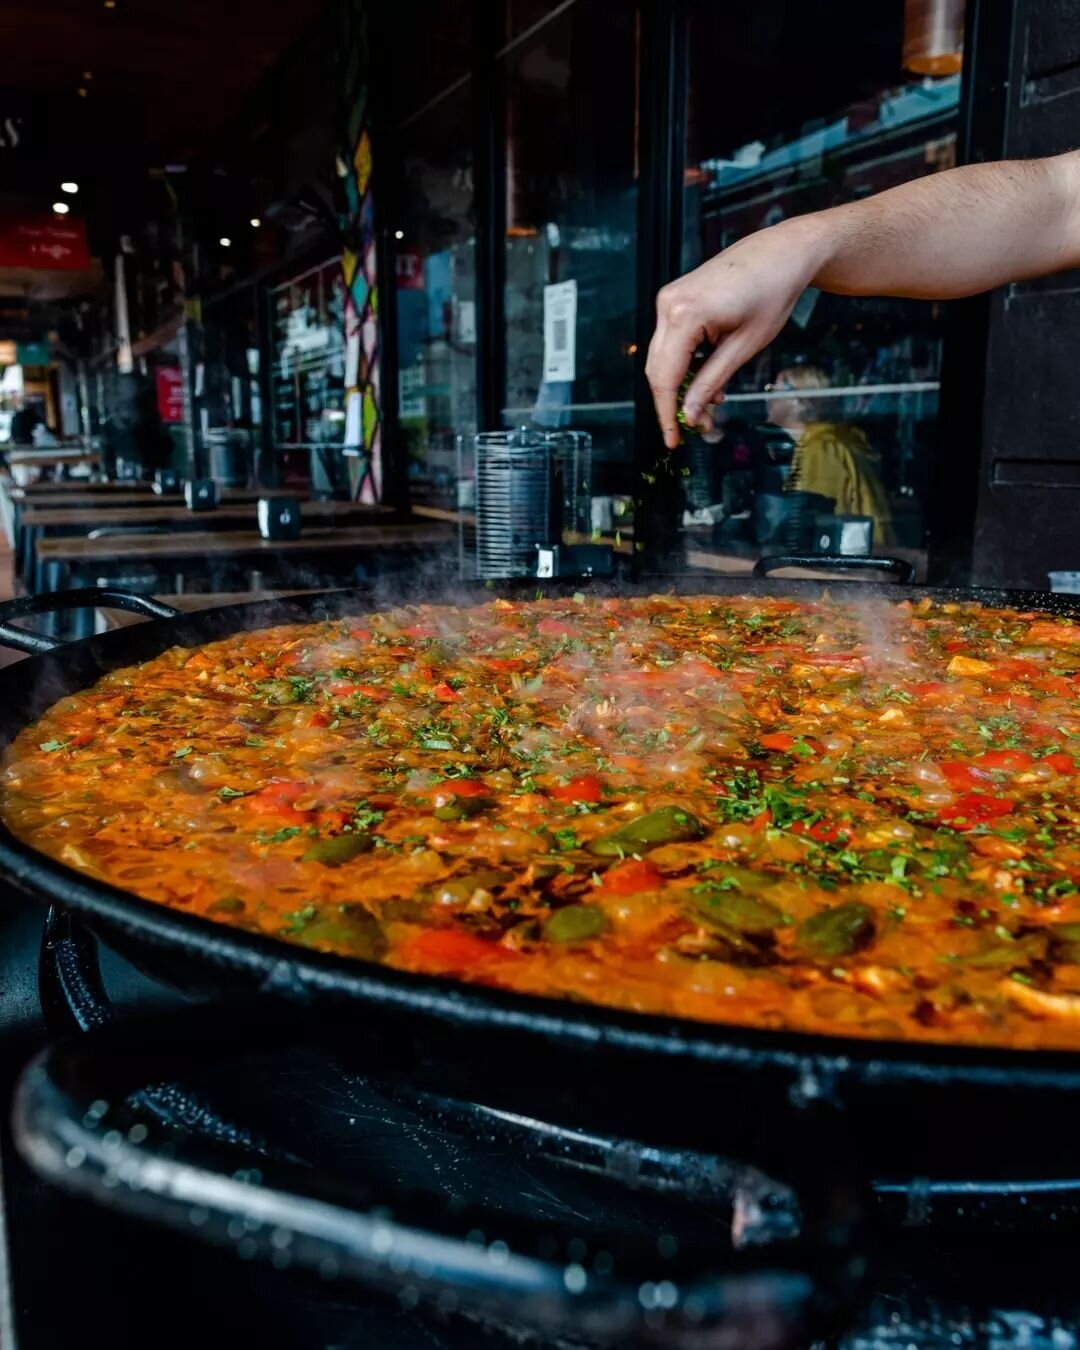 You know what time it is!&nbsp;🥘 

We'll be serving up our paella from 12pm tomorrow, for just $12 a pop. Available for dine in or takeaway.&nbsp;&nbsp;

#pinchosperth

#pertheats&nbsp;#urbanlistperth&nbsp;#urbanlistper&nbsp;#perthfoodies&nbsp;#pert